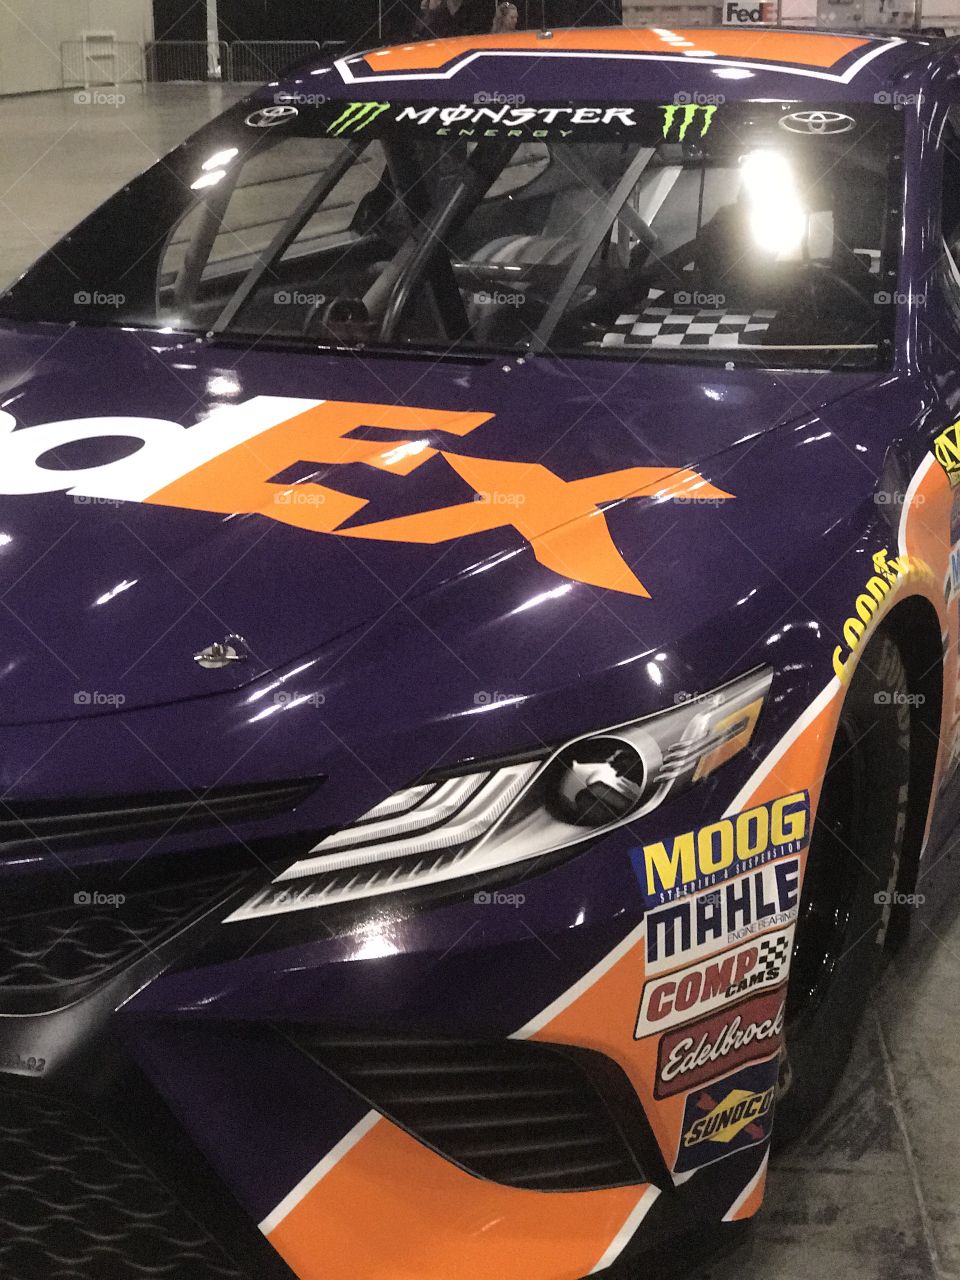 .odnalrO ni detacol tneduts FCU nA  .asleS yb kcilC Follow me @Selsa.Notes, @Selsa.Clicks, or @Selsa.Quotes.  FedEx racing car at the 80th annual National Truck Driving Championships.  #FedEx #Daytona500 #500 #race-car #racer  I tried to capture a click at every angle. There is a total of 53 photos in this album. 